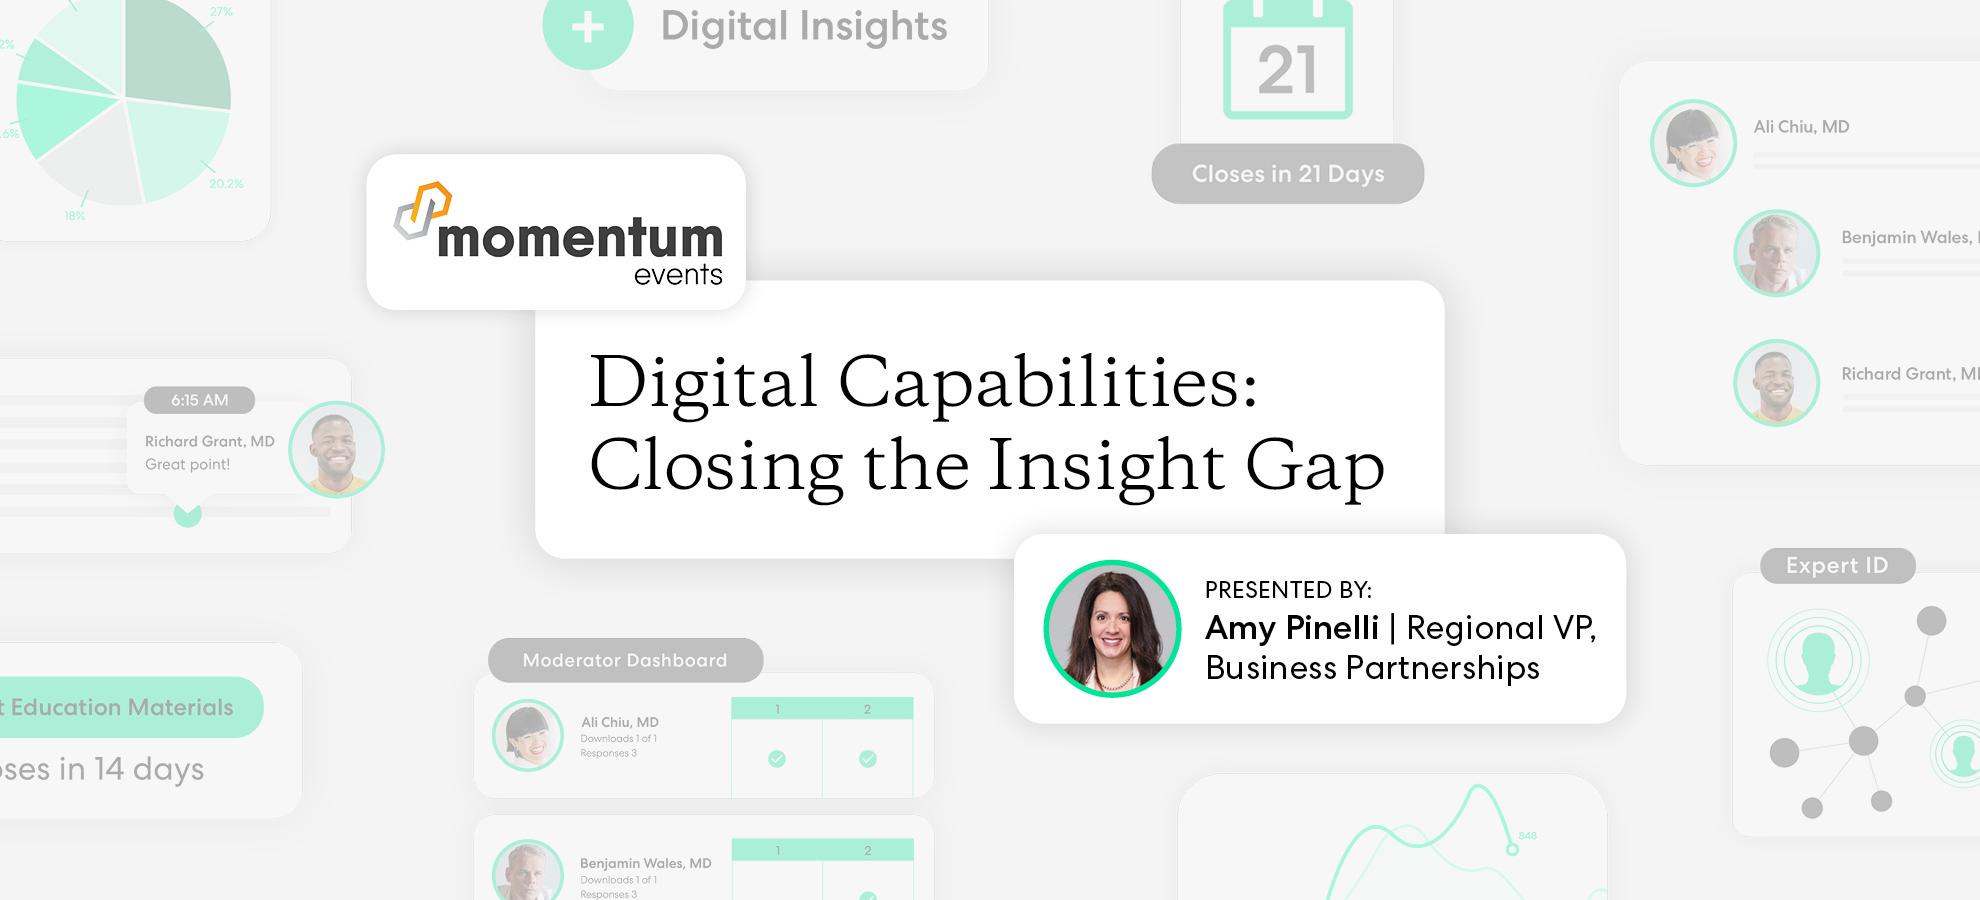 One to watch: Digital capabilities can solve the insight gap